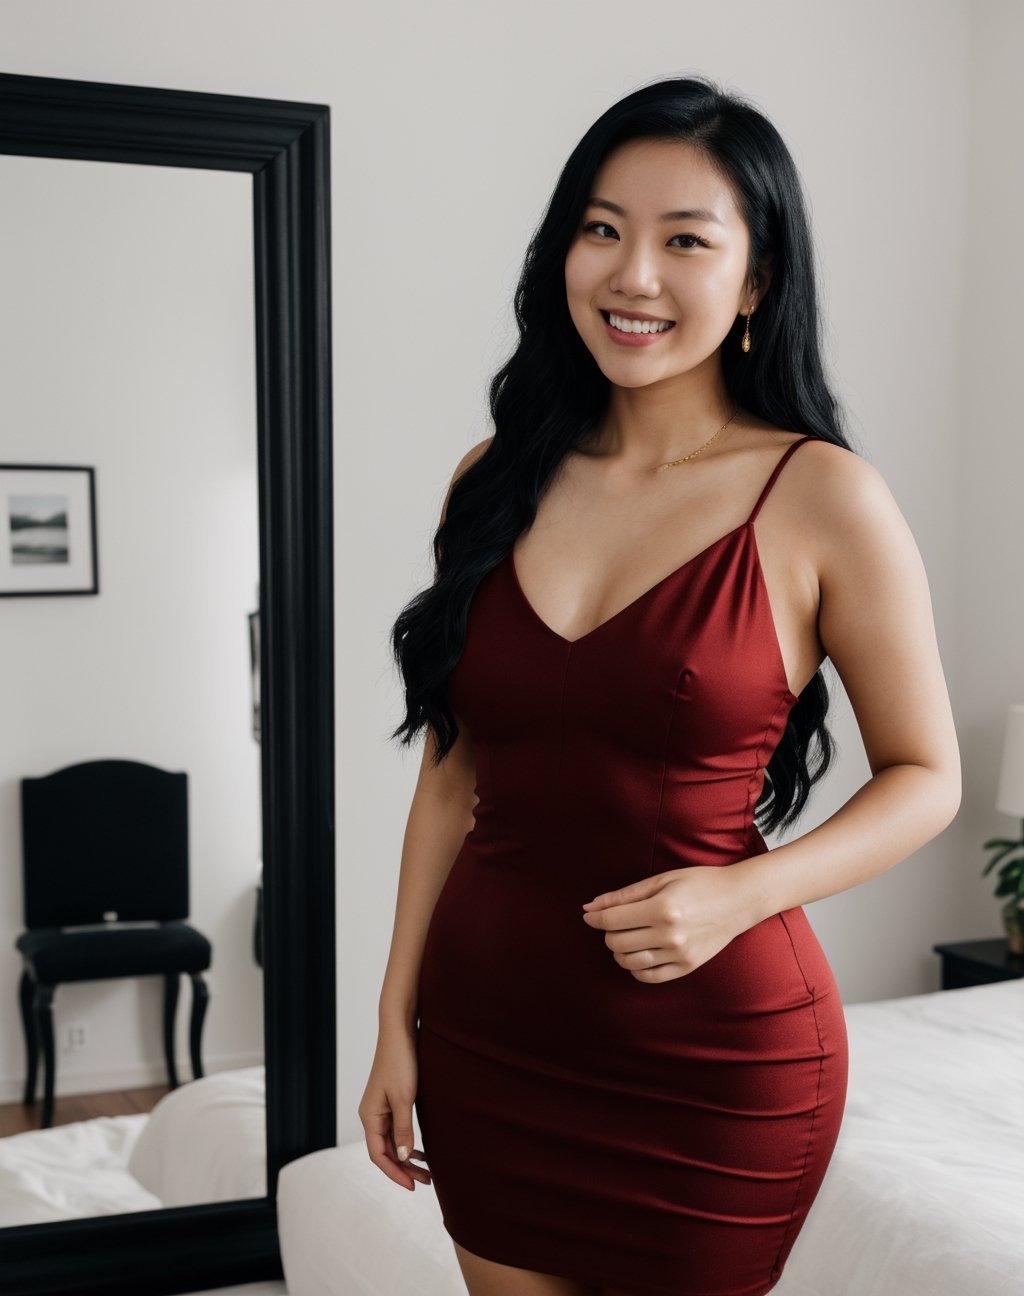 A photo of a 25-year-old Asian woman, with long black hair and brown eyes, wearing a tight red dress that shows off her curves, high heels, and gold jewelry. She has a seductive smile on her face and is standing in front of a mirror admiring herself. The location is an indoor bedroom at night with dim lighting coming from candles placed around the room. The camera angle is from above looking down at her body while she poses for the camera using a Canon EOS R6 with an f/1.8 lens set to ISO 1000 at 1/250 shutter speed and focused on her face.